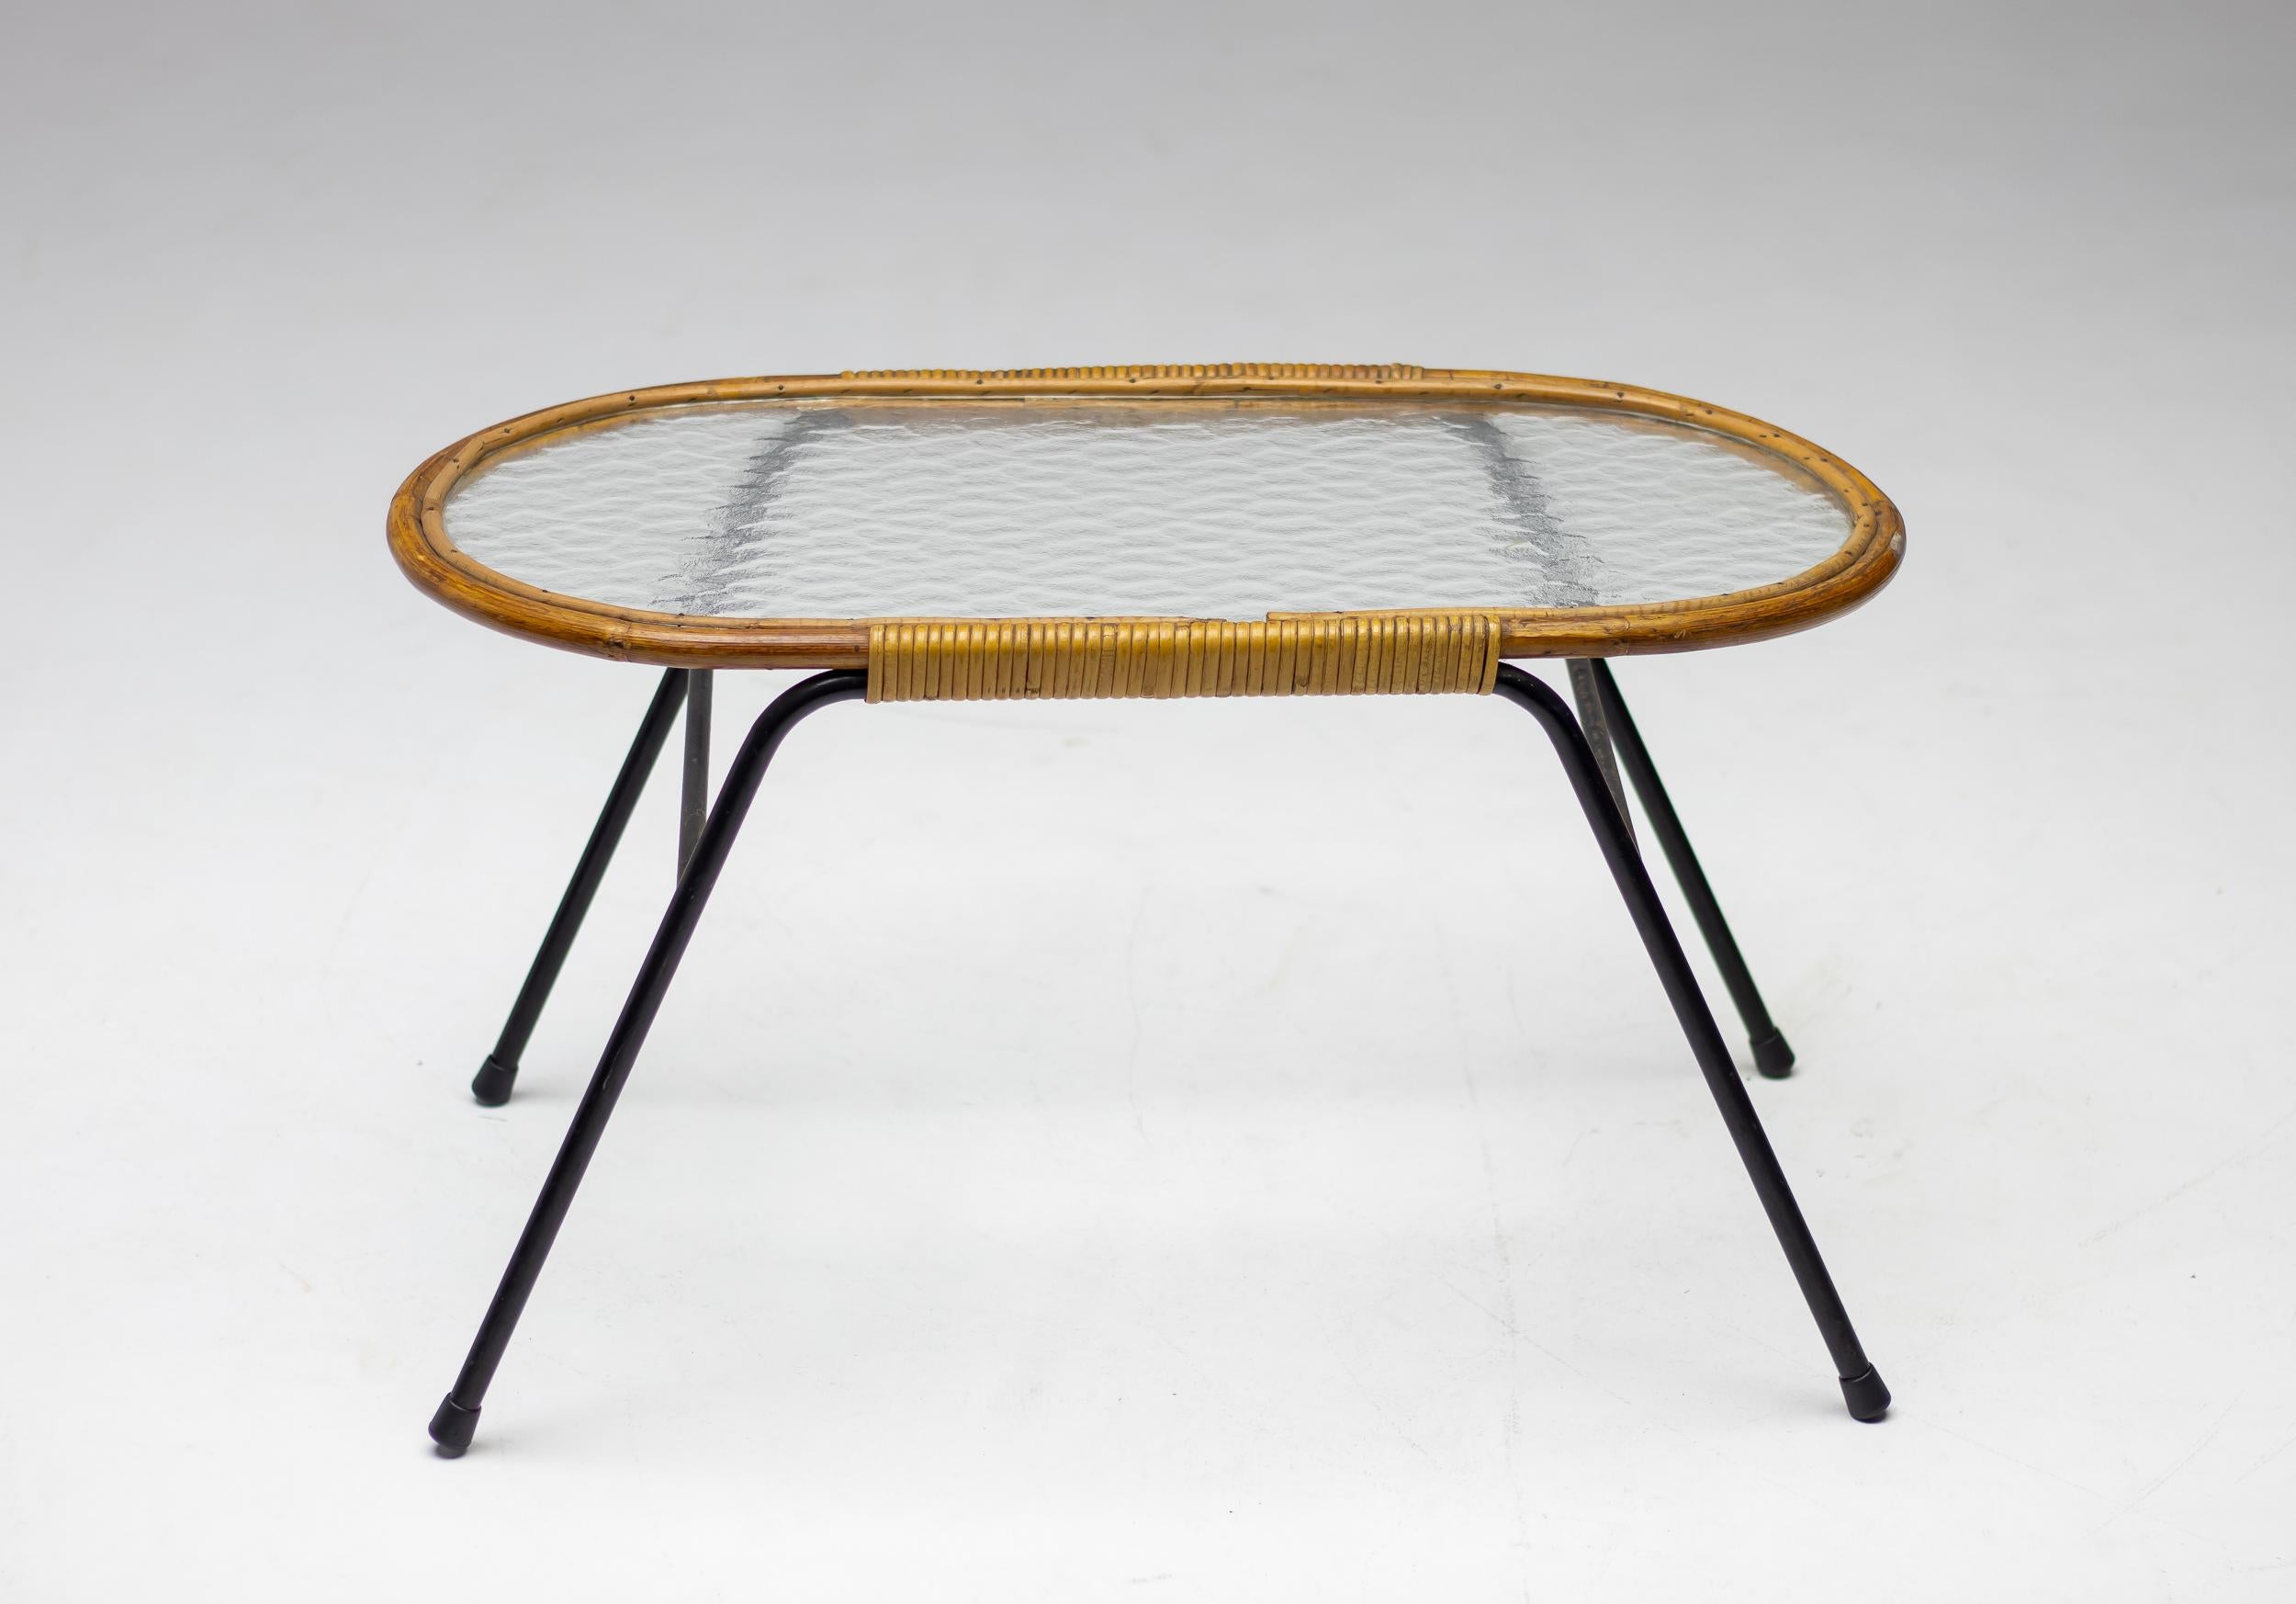 Dirk van Sliedregt oval side table with textured glass and rattan for Rohé Noordwolde, The Netherlands.
Beautiful minimalistic Dutch Mid-Century Modern table.

Dirk van Sliedregt (1920 – 2010) combined his work as a furniture designer with his work